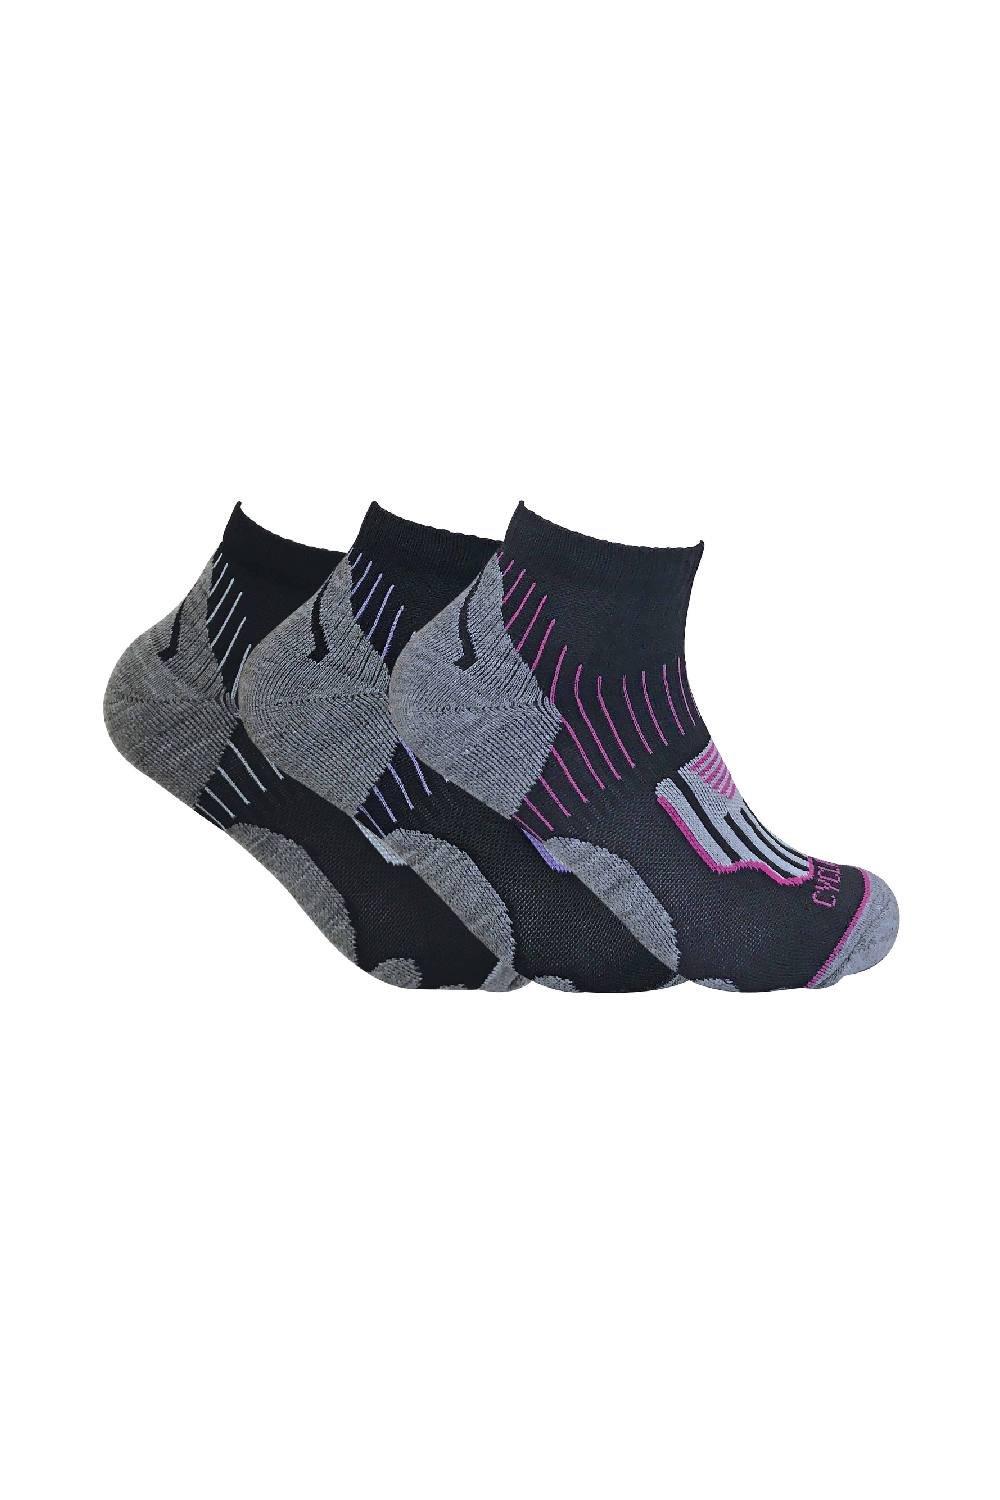 3 Pairs Ankle Cycling Socks Sport Socks with Heel Padding